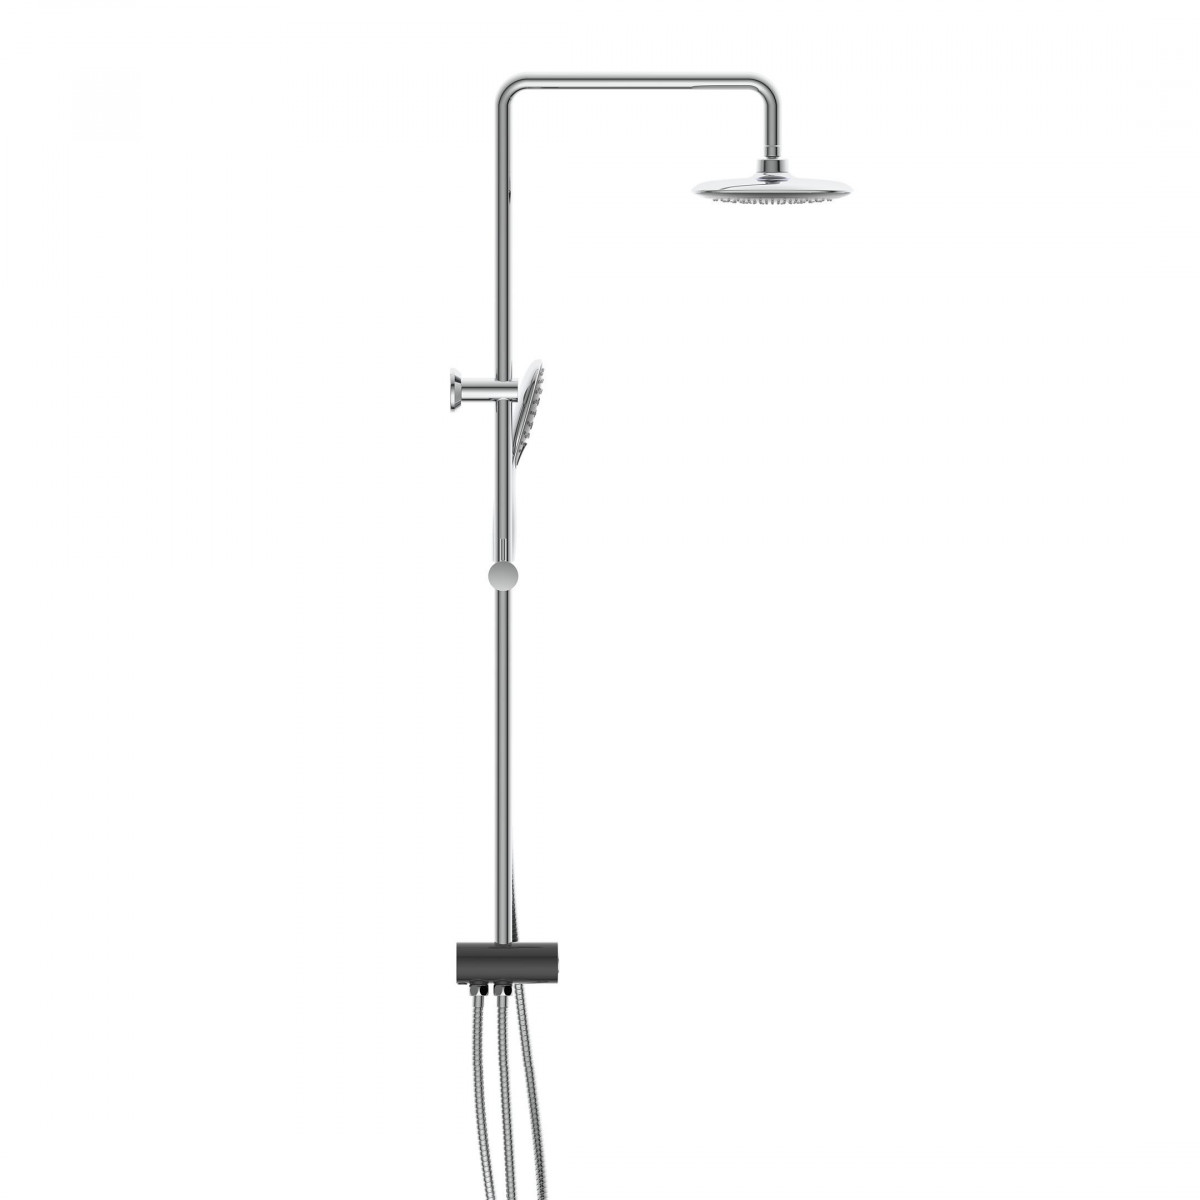 AQUASTAR Overhead shower set, chrome/ anthracite, with tray (lateral diverter)